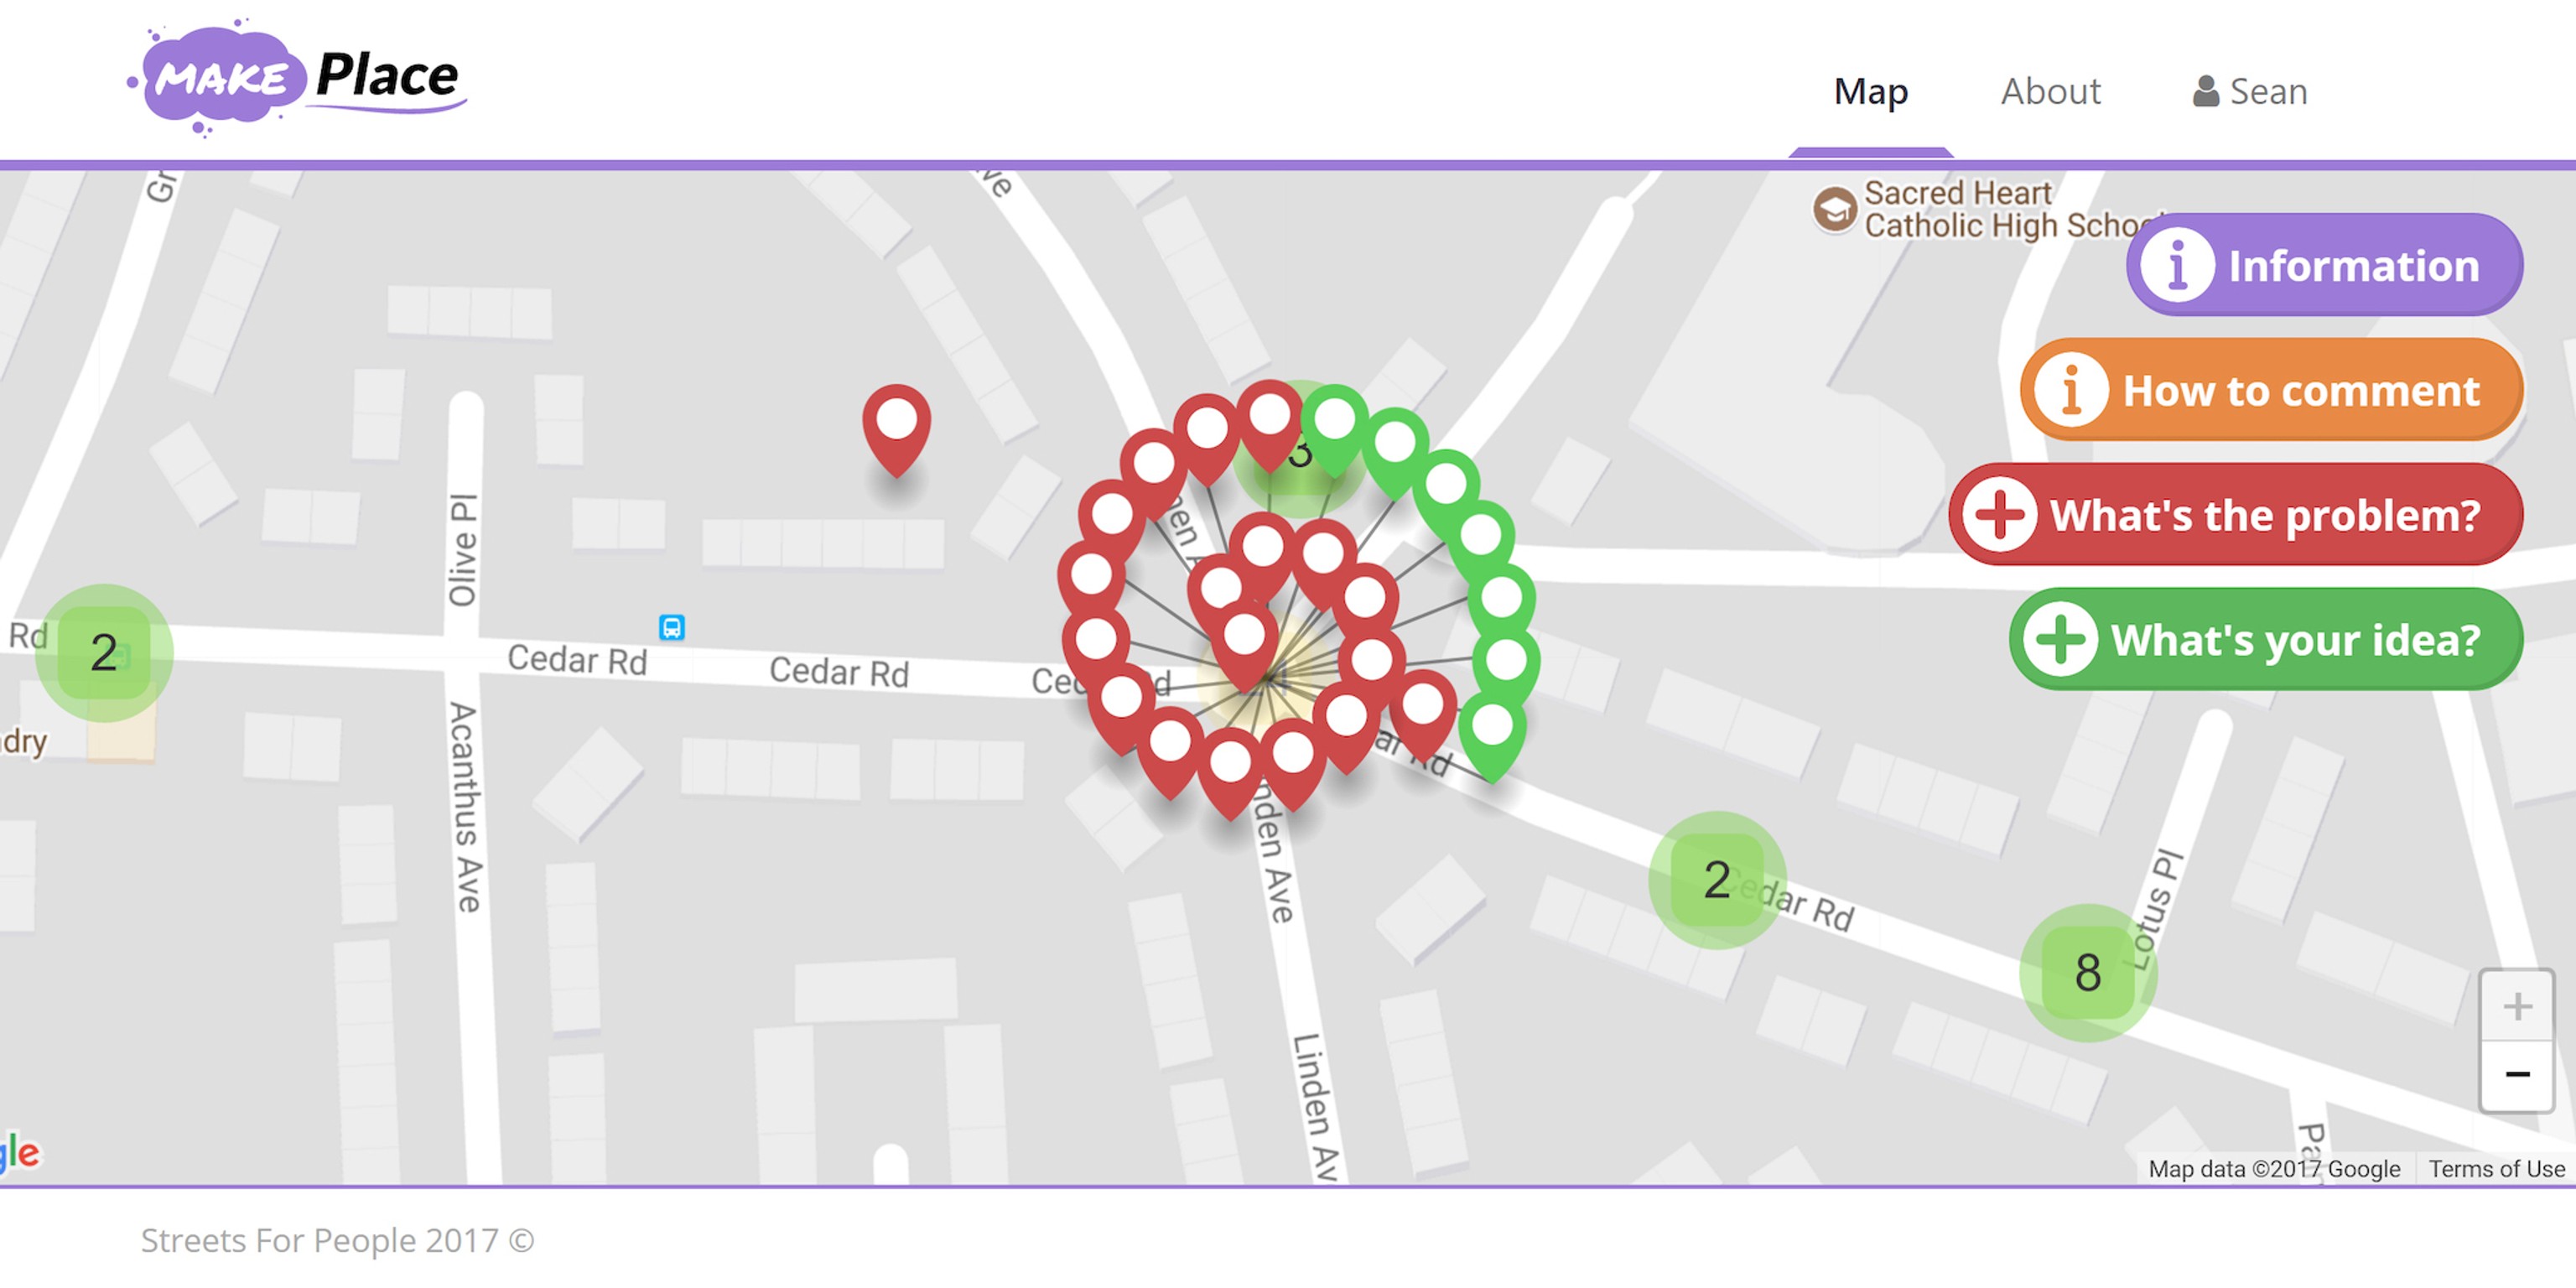 Make Place: an open-source mapping and survey tool